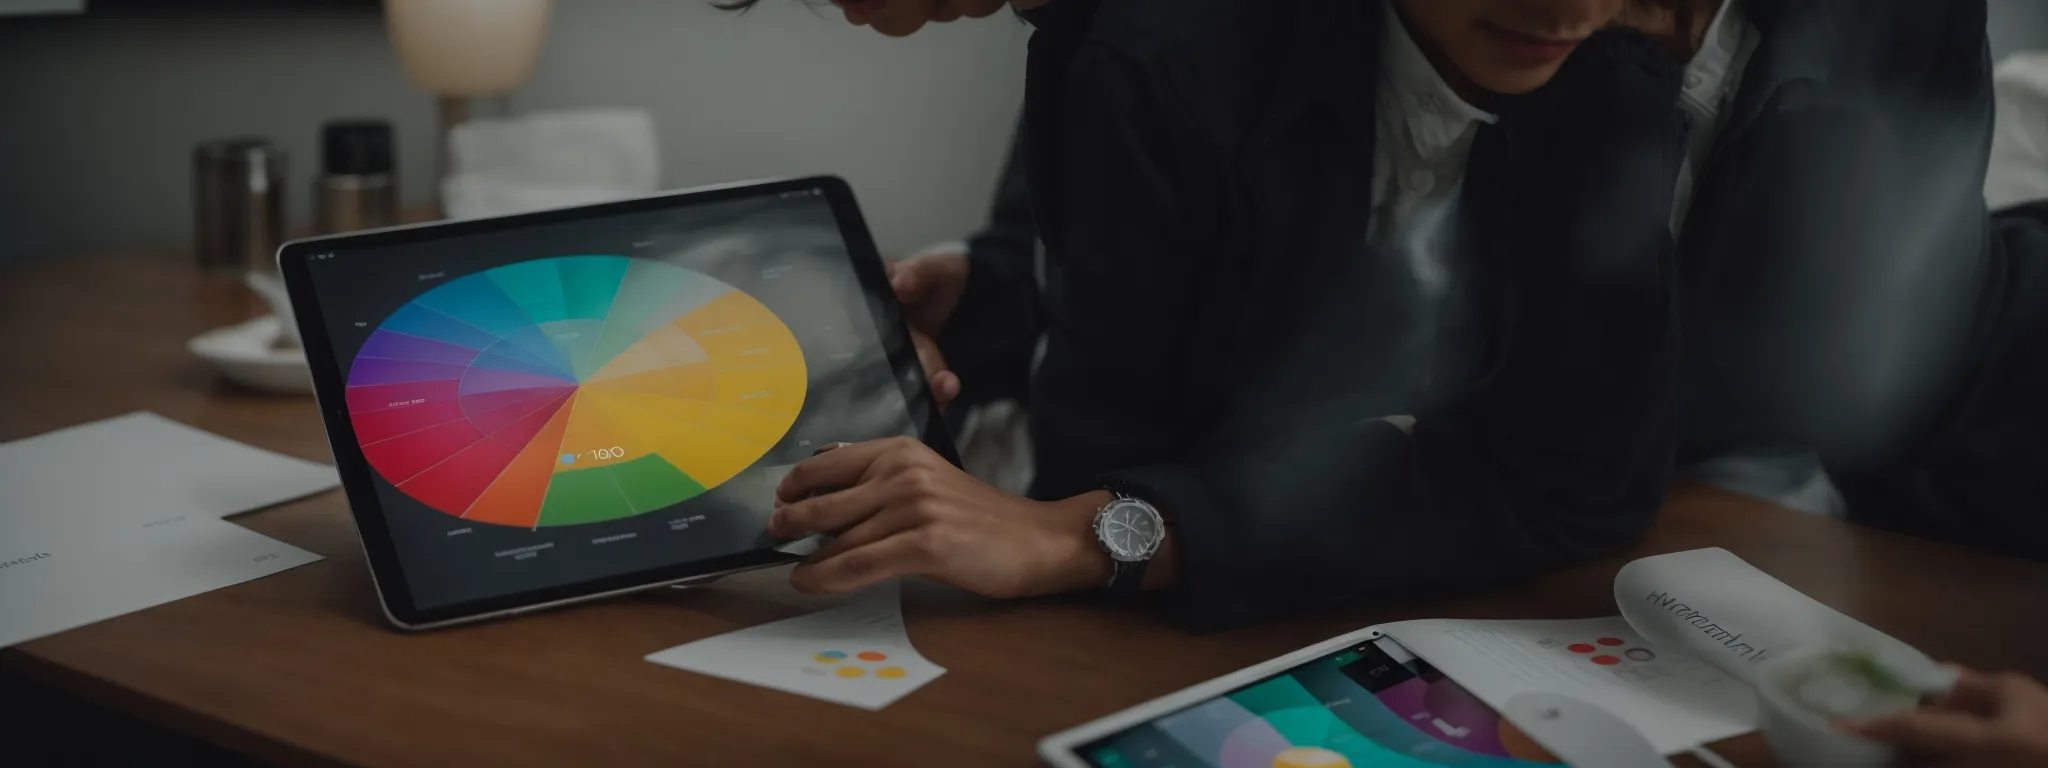 a marketer analyzing a colorful pie chart representing different audience segments on a digital tablet.